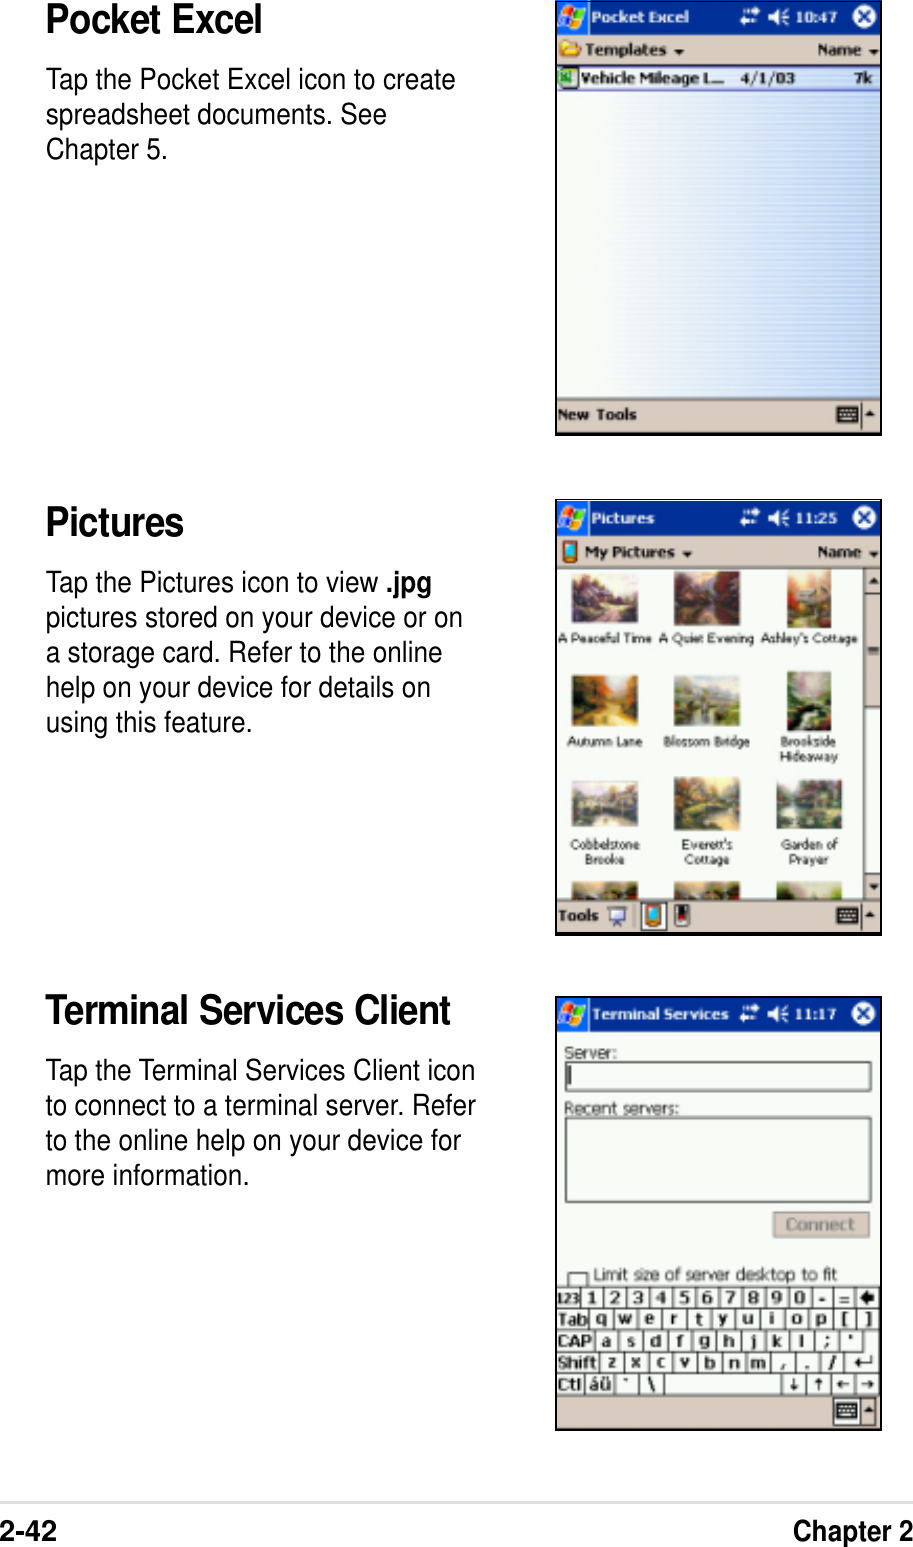 2-42Chapter 2Pocket ExcelTap the Pocket Excel icon to createspreadsheet documents. SeeChapter 5.PicturesTap the Pictures icon to view .jpgpictures stored on your device or ona storage card. Refer to the onlinehelp on your device for details onusing this feature.Terminal Services ClientTap the Terminal Services Client iconto connect to a terminal server. Referto the online help on your device formore information.